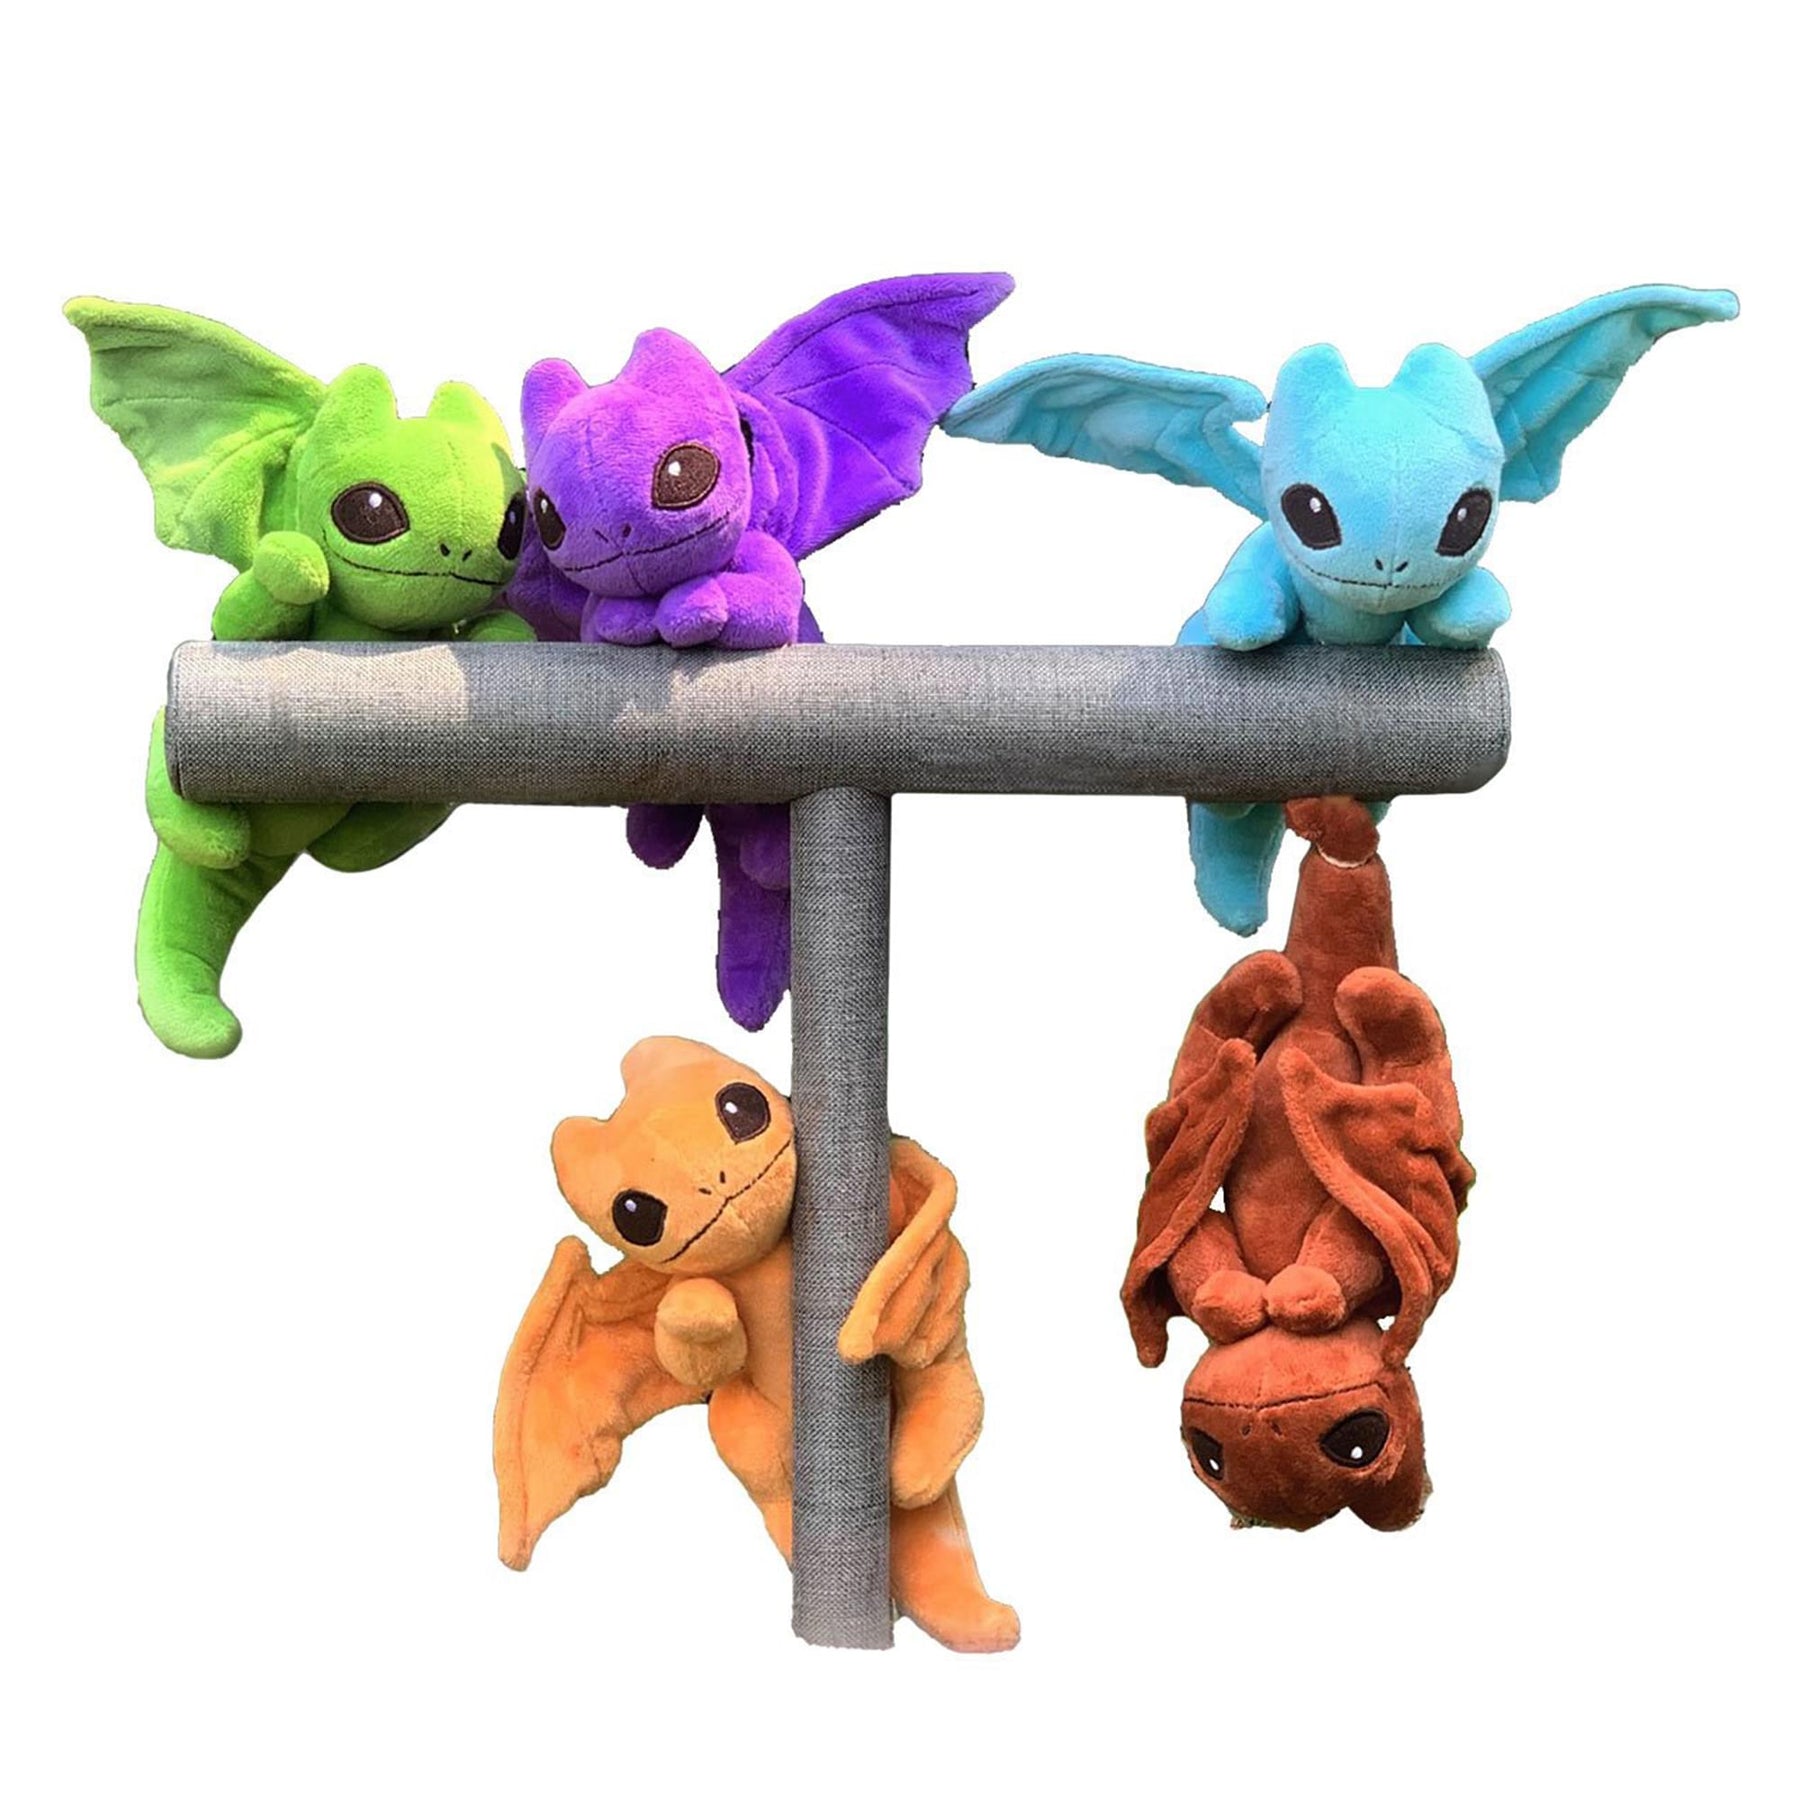 Little Embers 7 Inch Plush w/ Moveable Limbs & Magnetic Hands | Cinder (Purple)